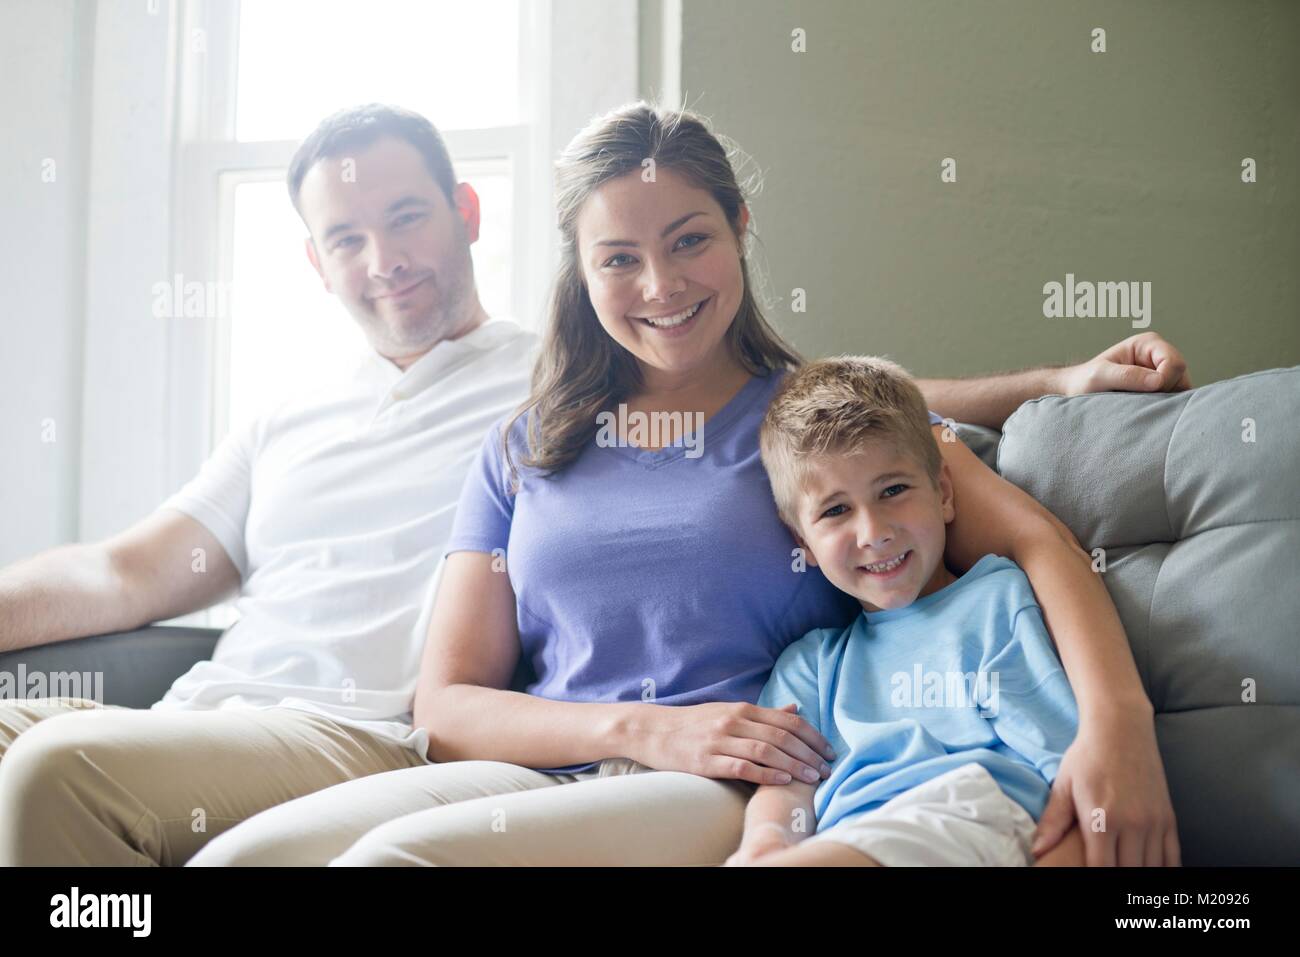 Boy sitting on sofa with his mother and father, portrait. Stock Photo